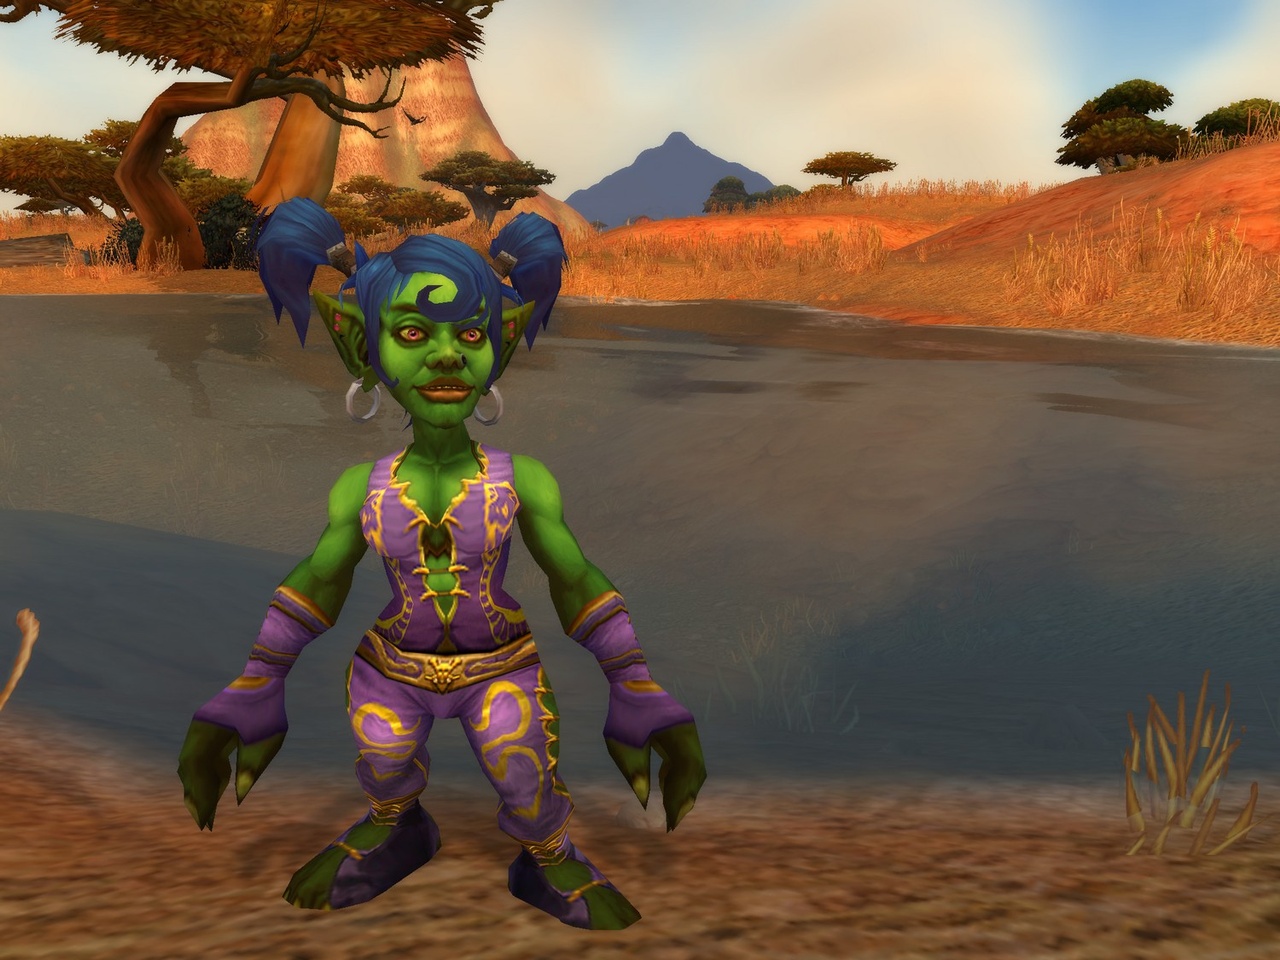 These little green guys will join the World of Warcraft race roster with the Cataclysm expansion pack.